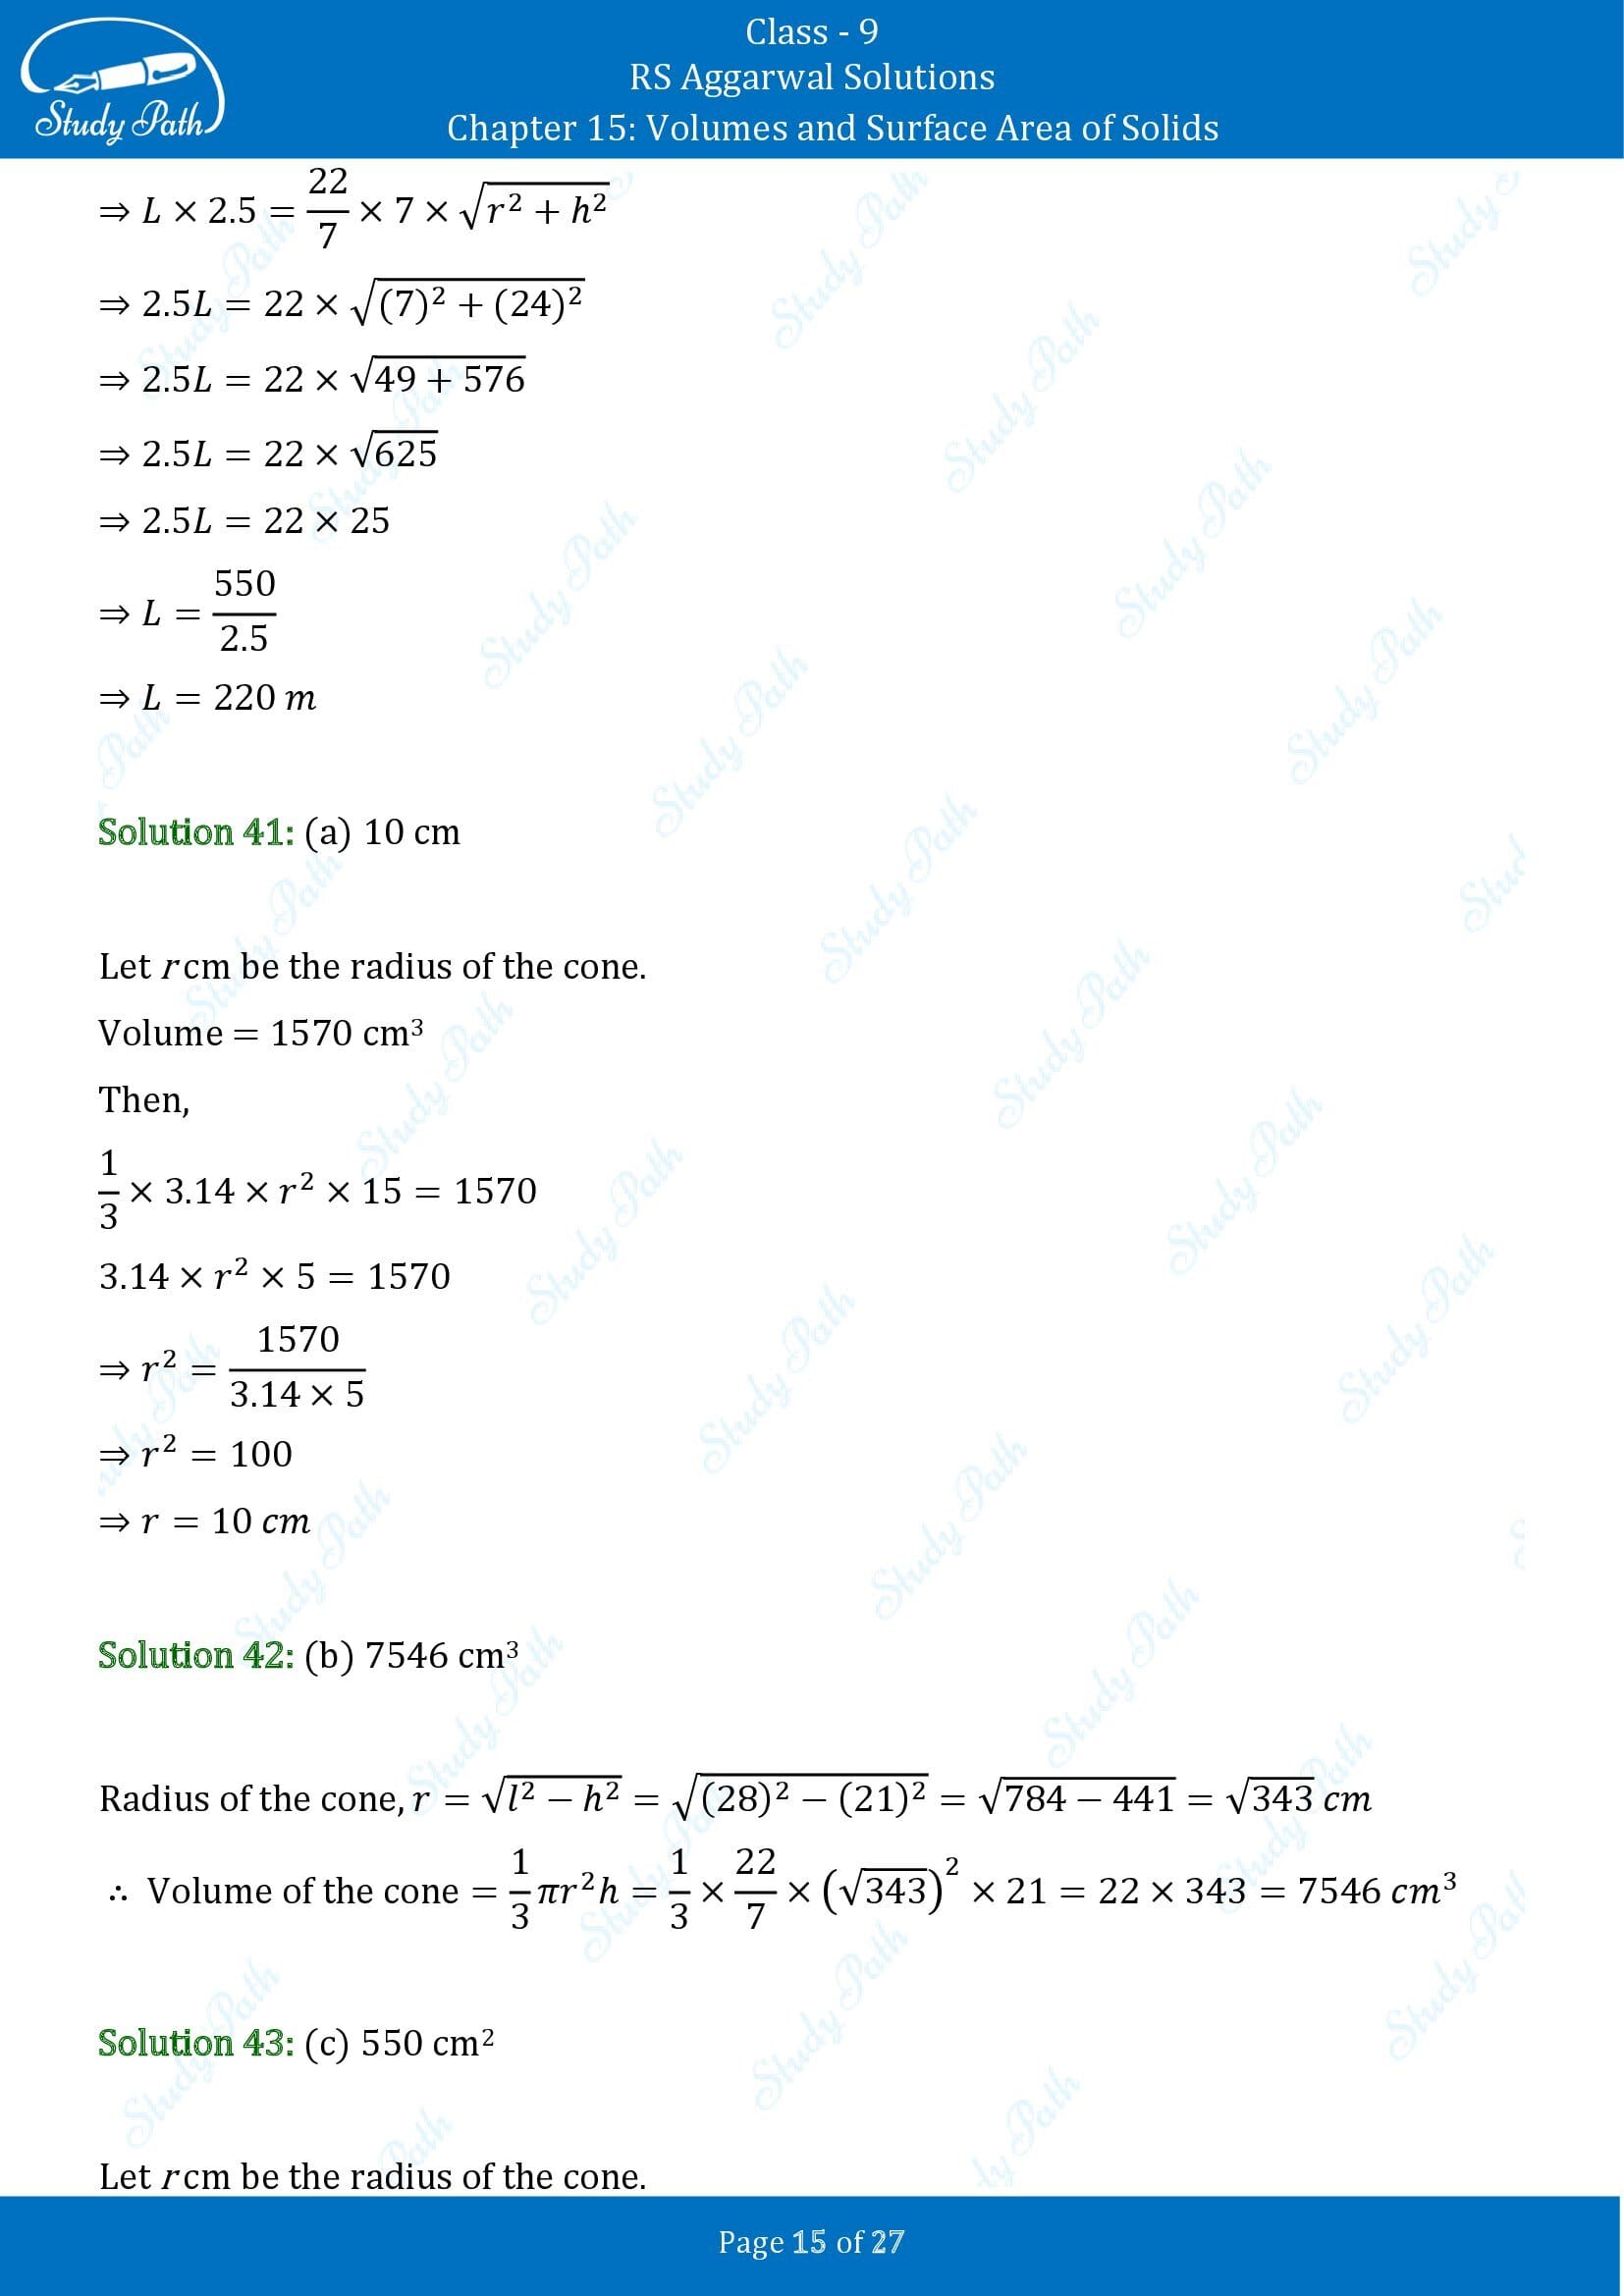 RS Aggarwal Solutions Class 9 Chapter 15 Volumes and Surface Area of Solids Multiple Choice Questions MCQs 00015